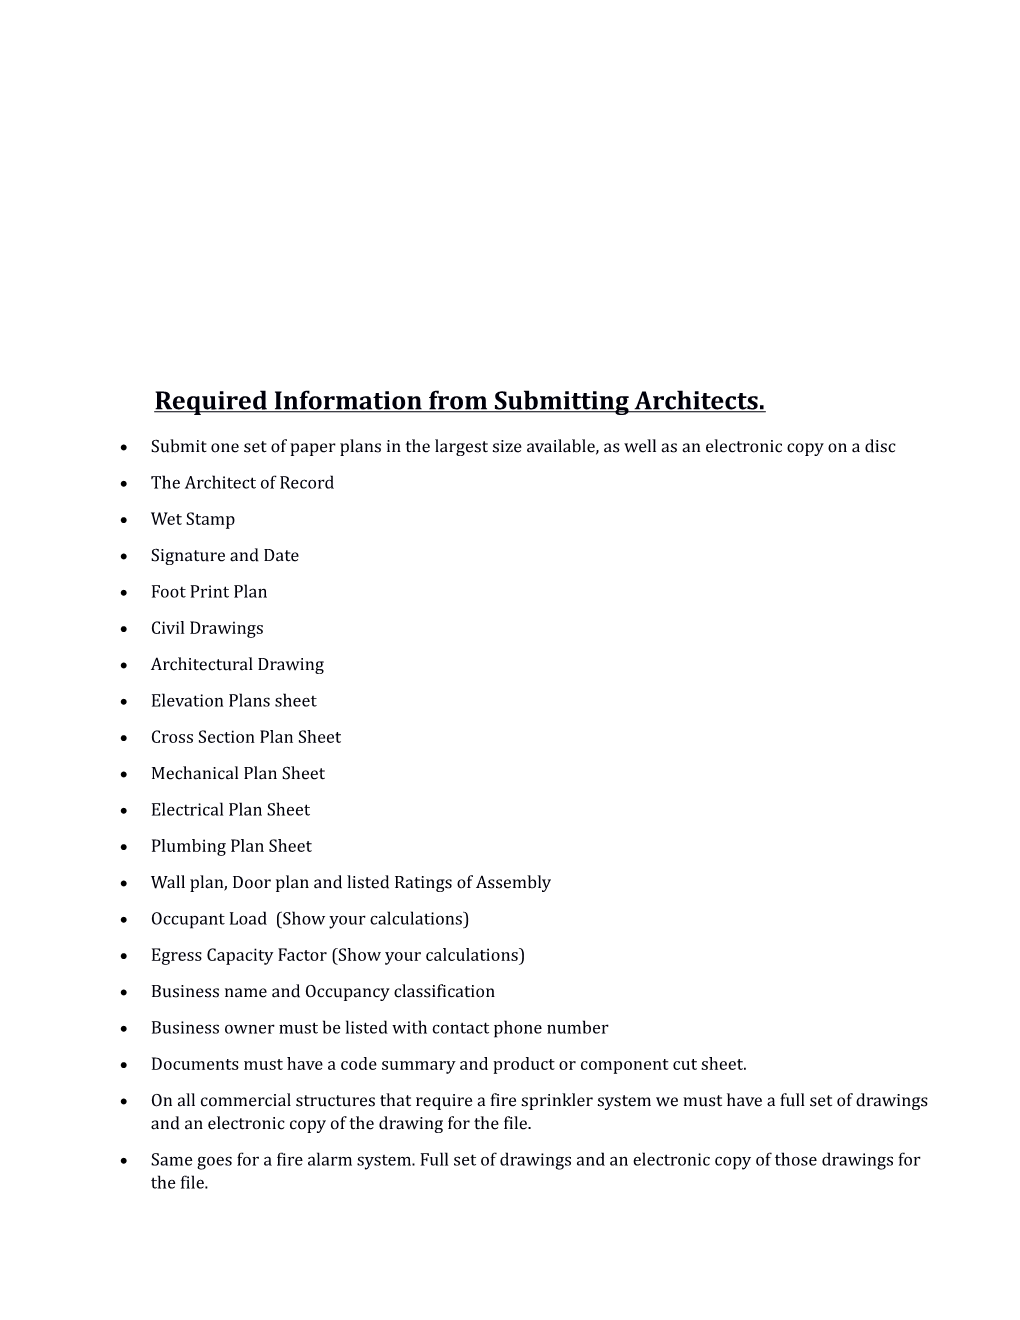 Required Information from Submitting Architects